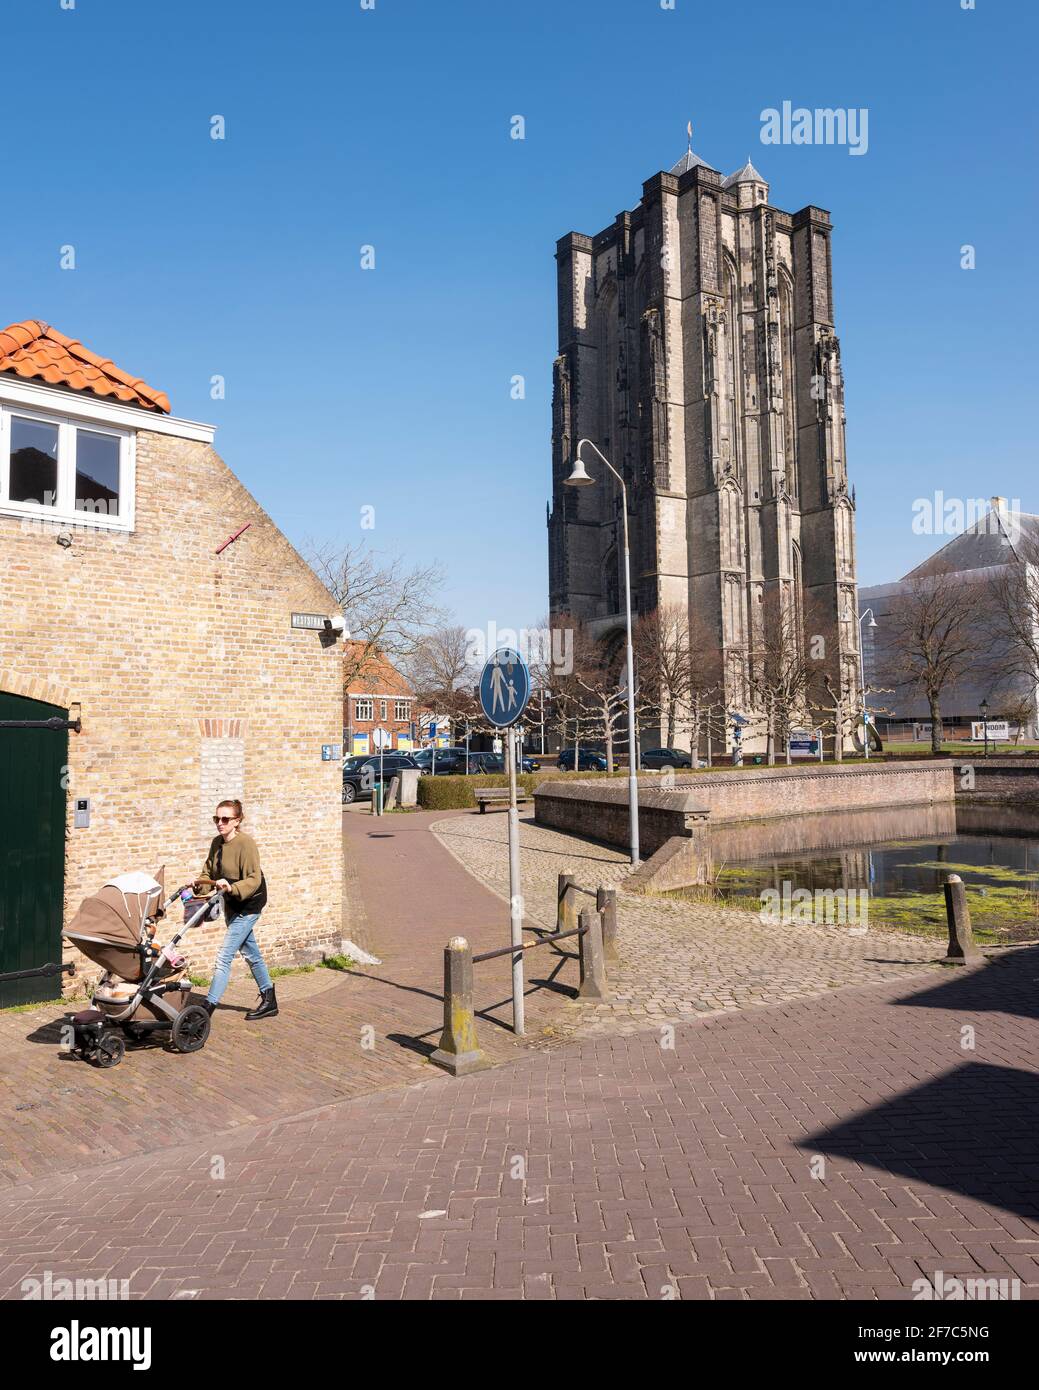 young woman with pram near old tower in old city of zierikzee Stock Photo